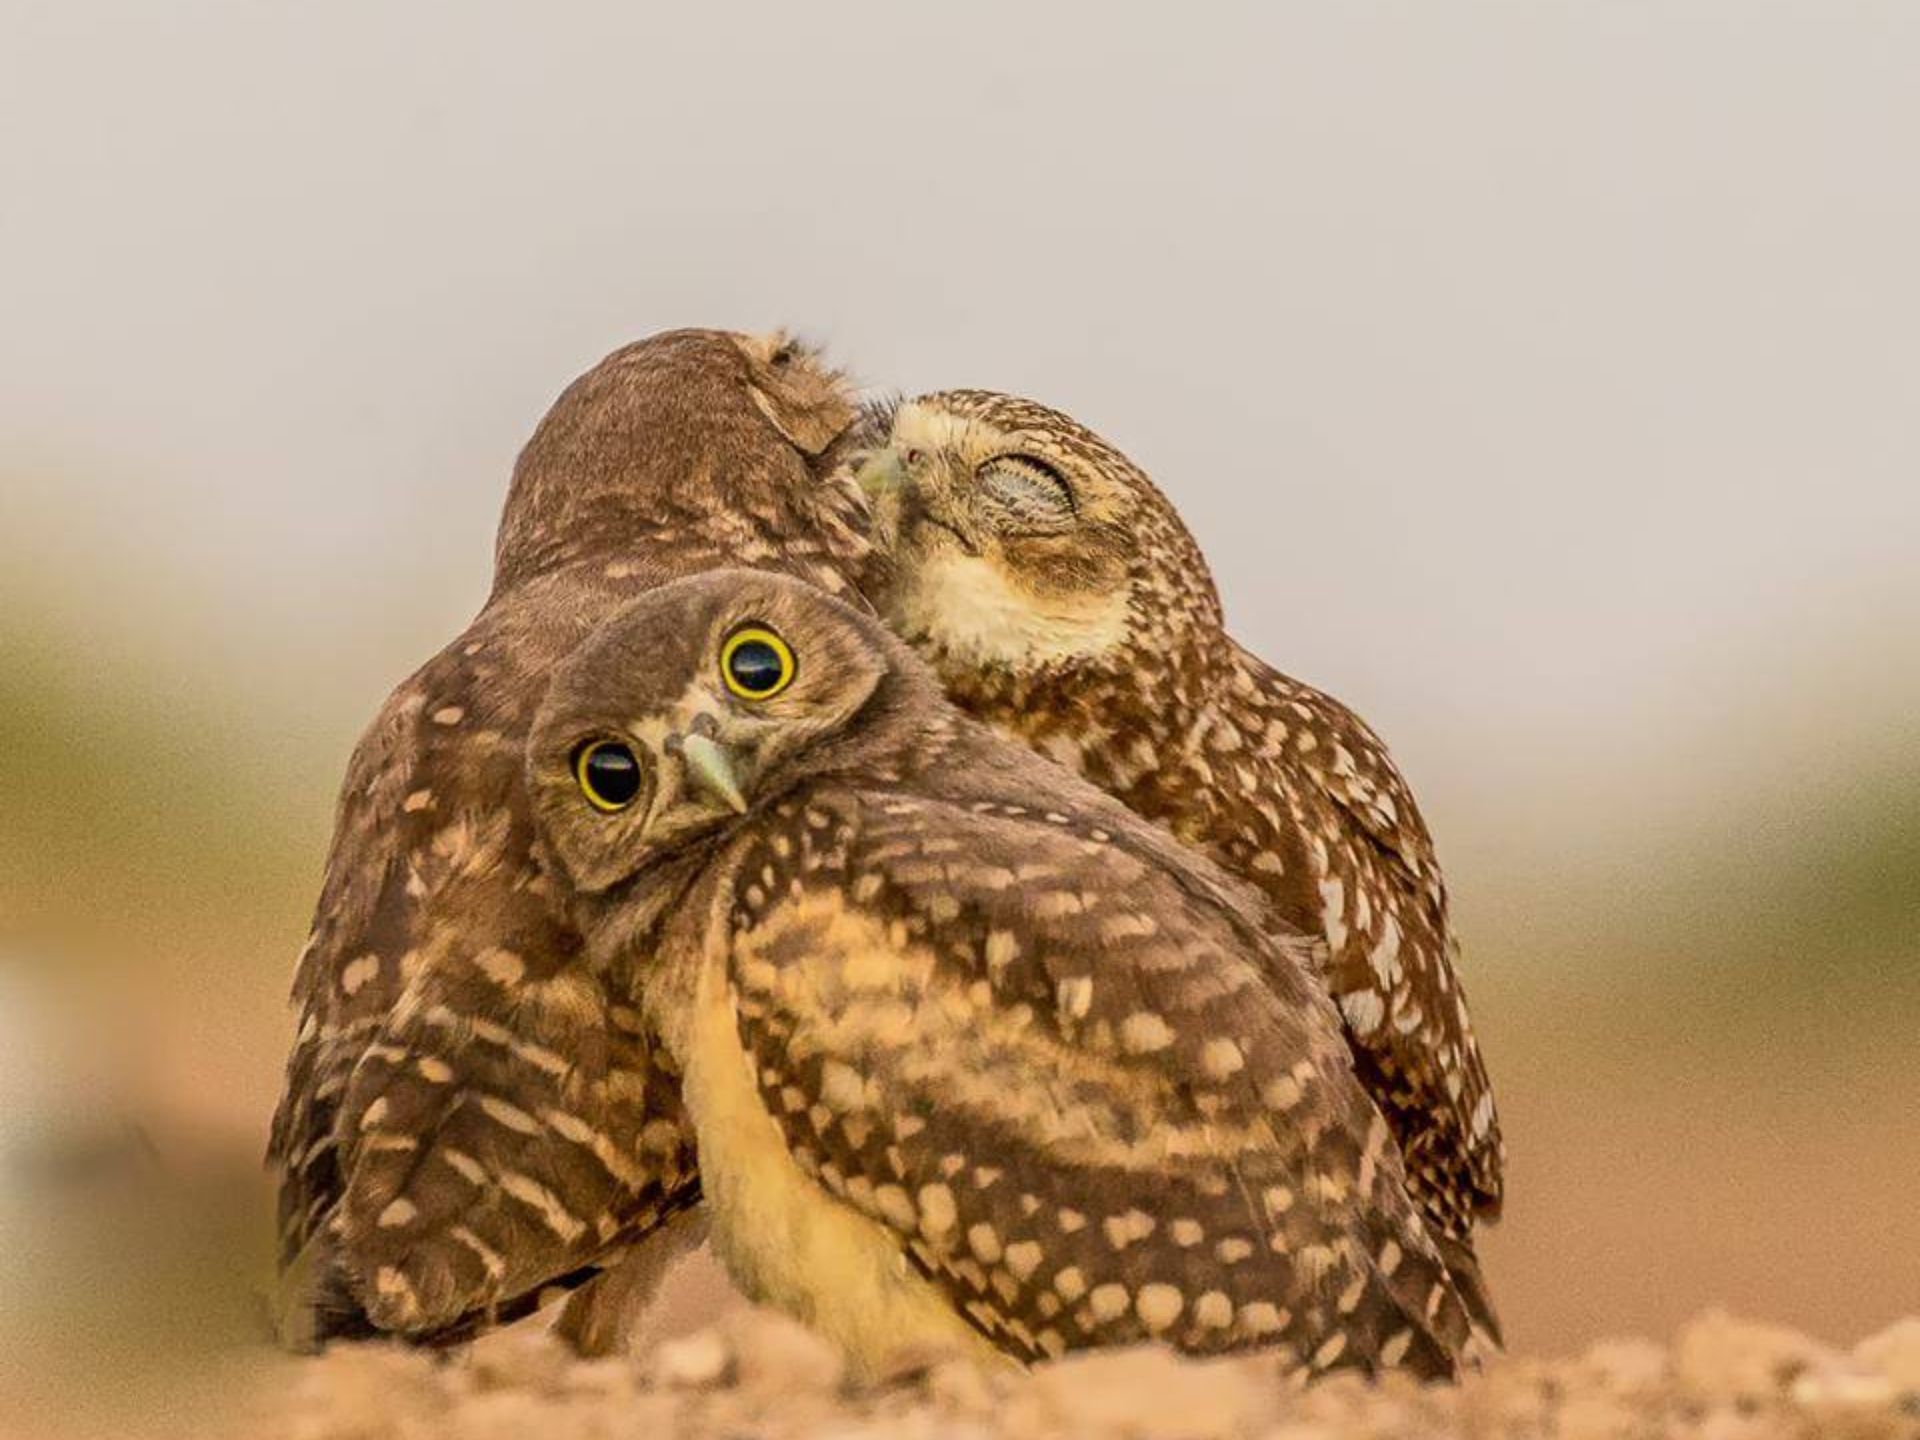 The funniest wildlife photos of 2017 are just as wild and hilarious as you'd expect